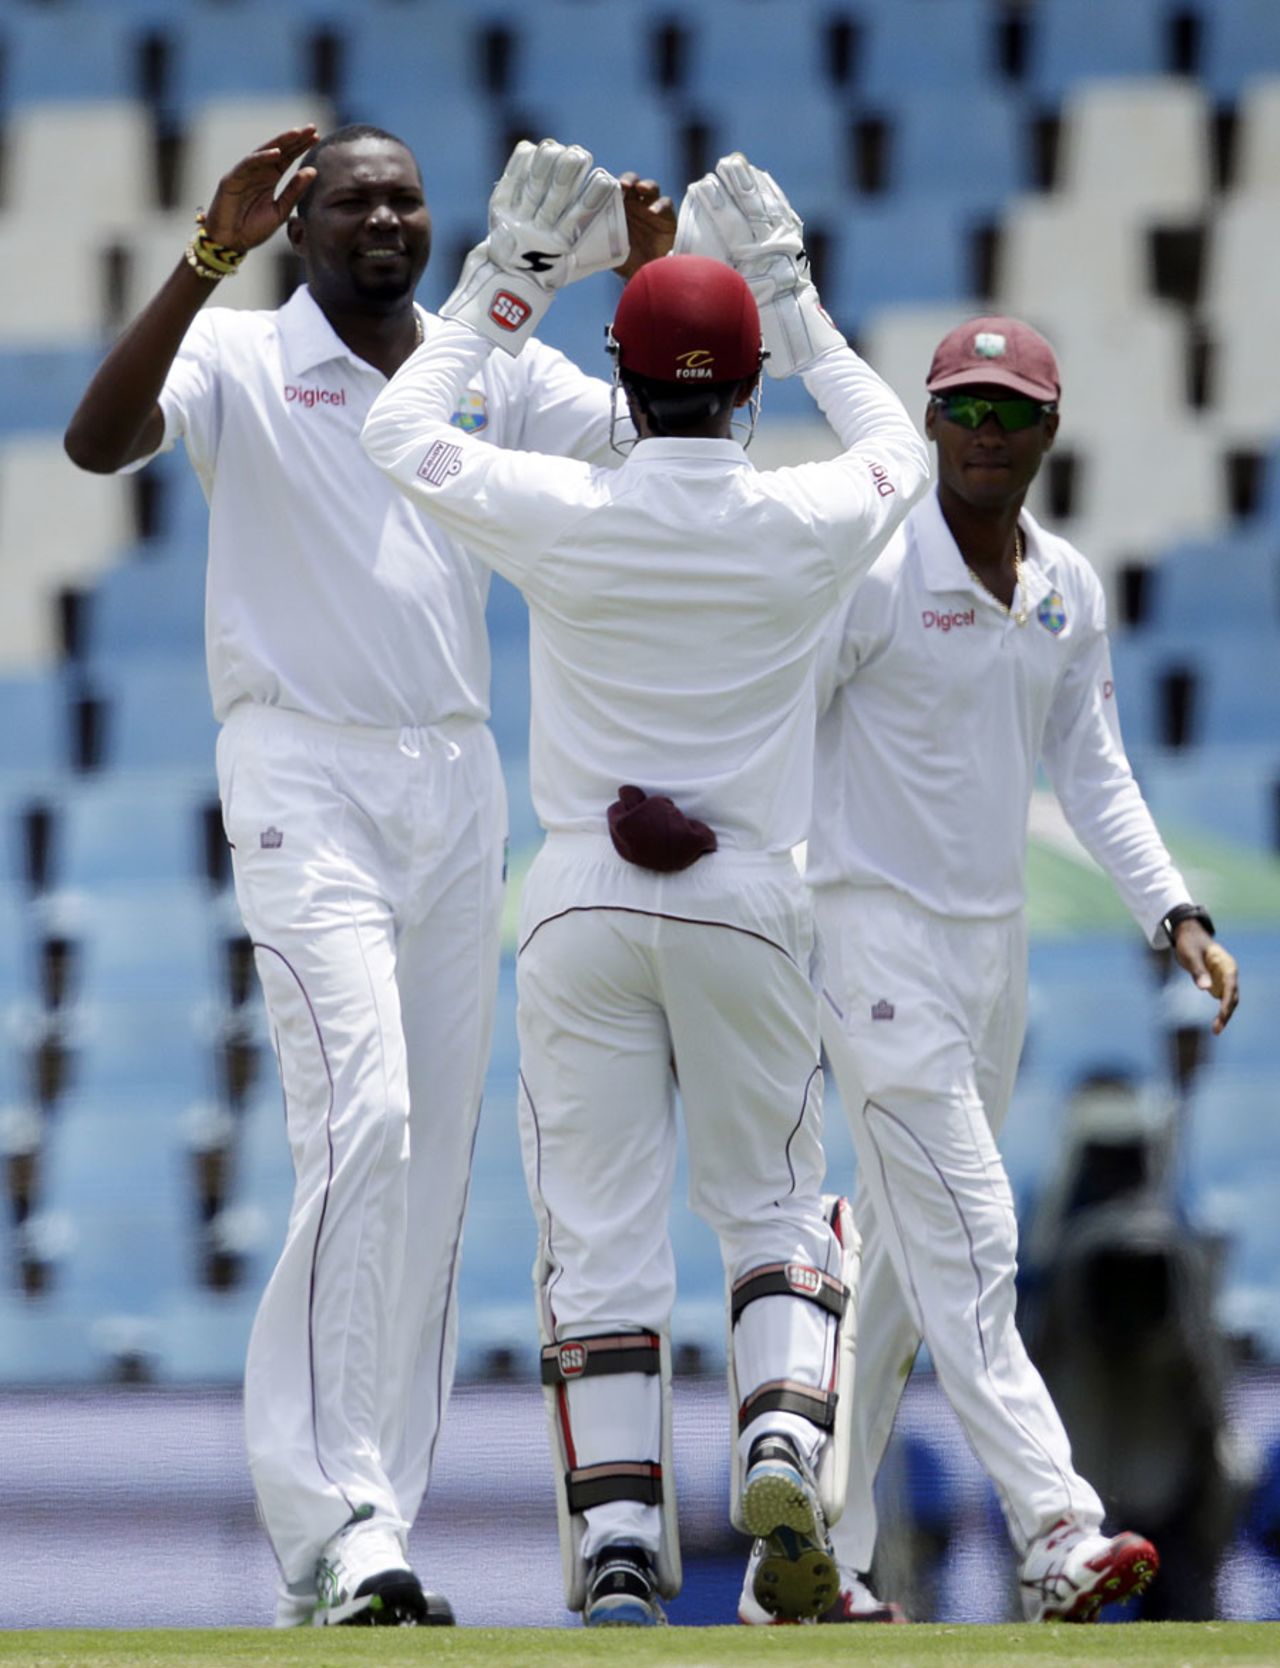 Sulieman Benn ended the fourth-wicket stand of 308, South Africa v West Indies, 1st Test, Centurion, 2nd day, December 18, 2014